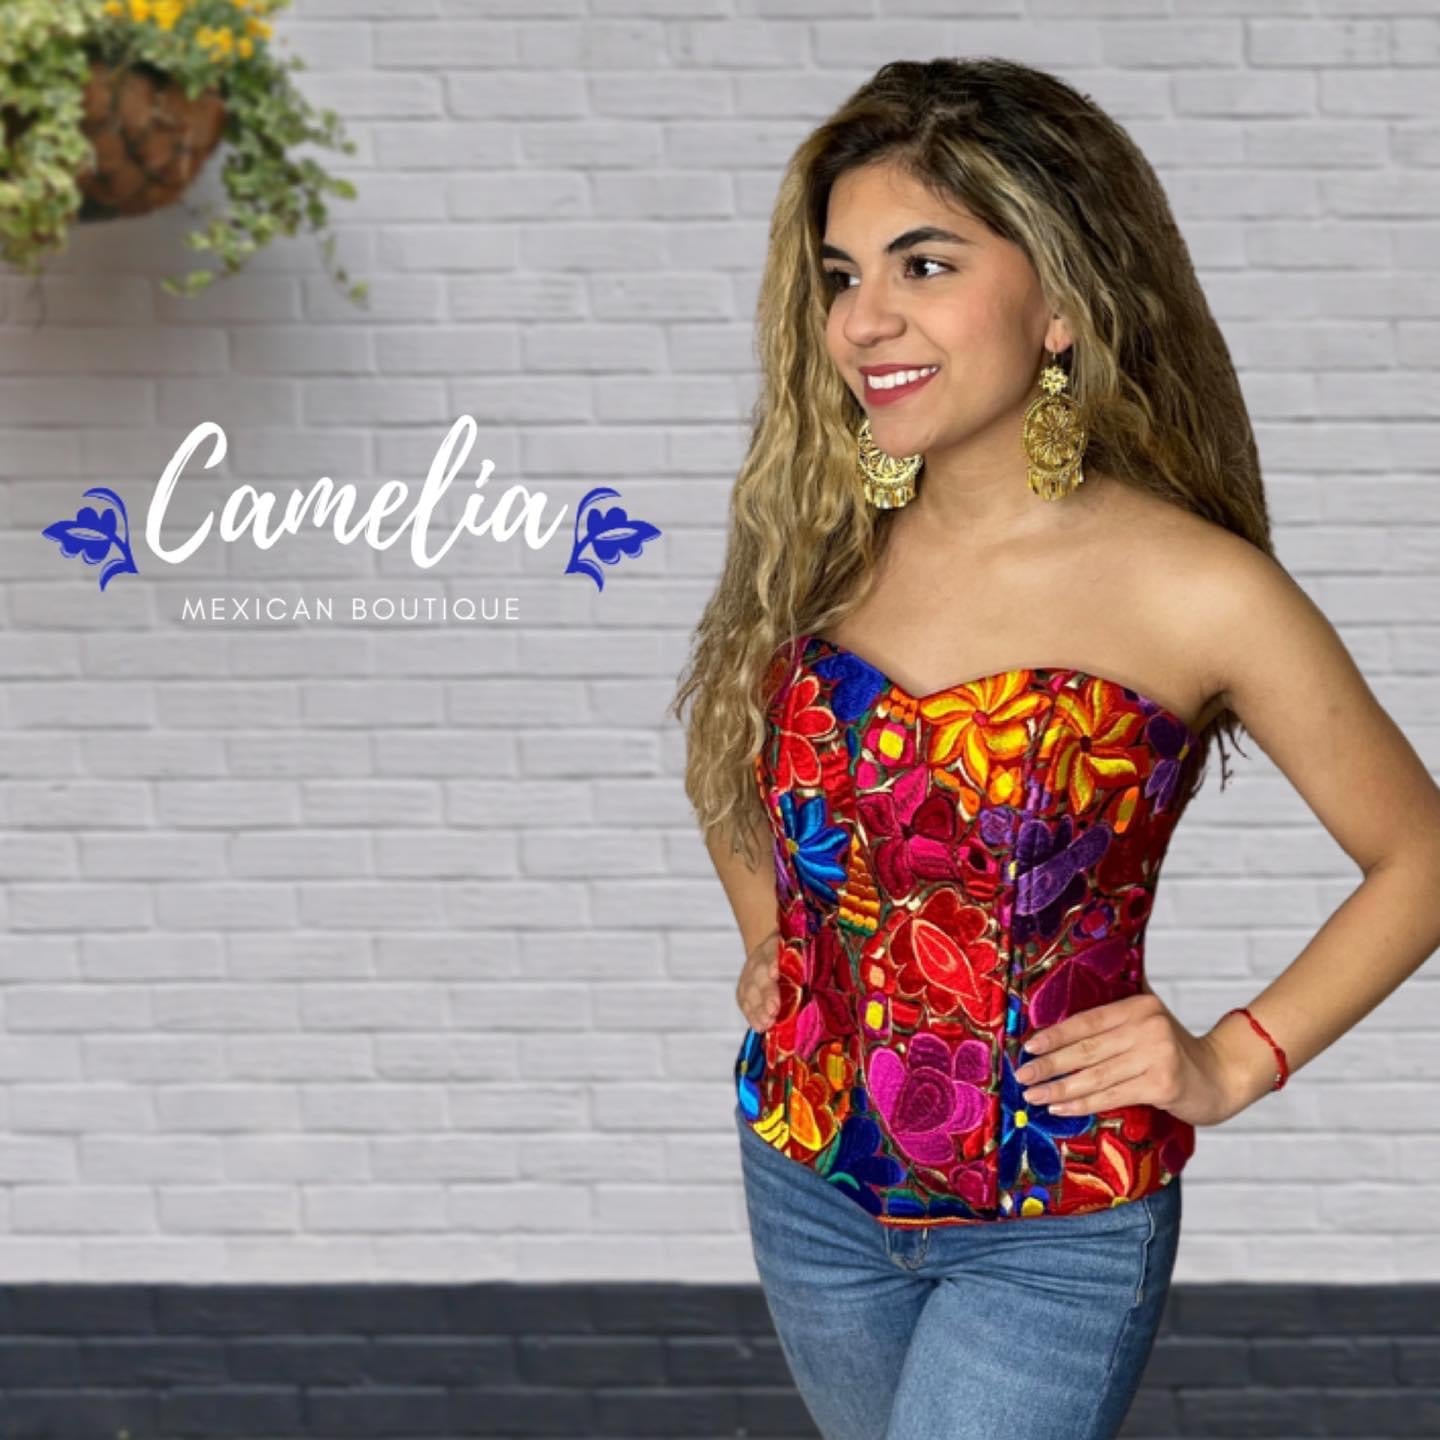 Embroidered corset top